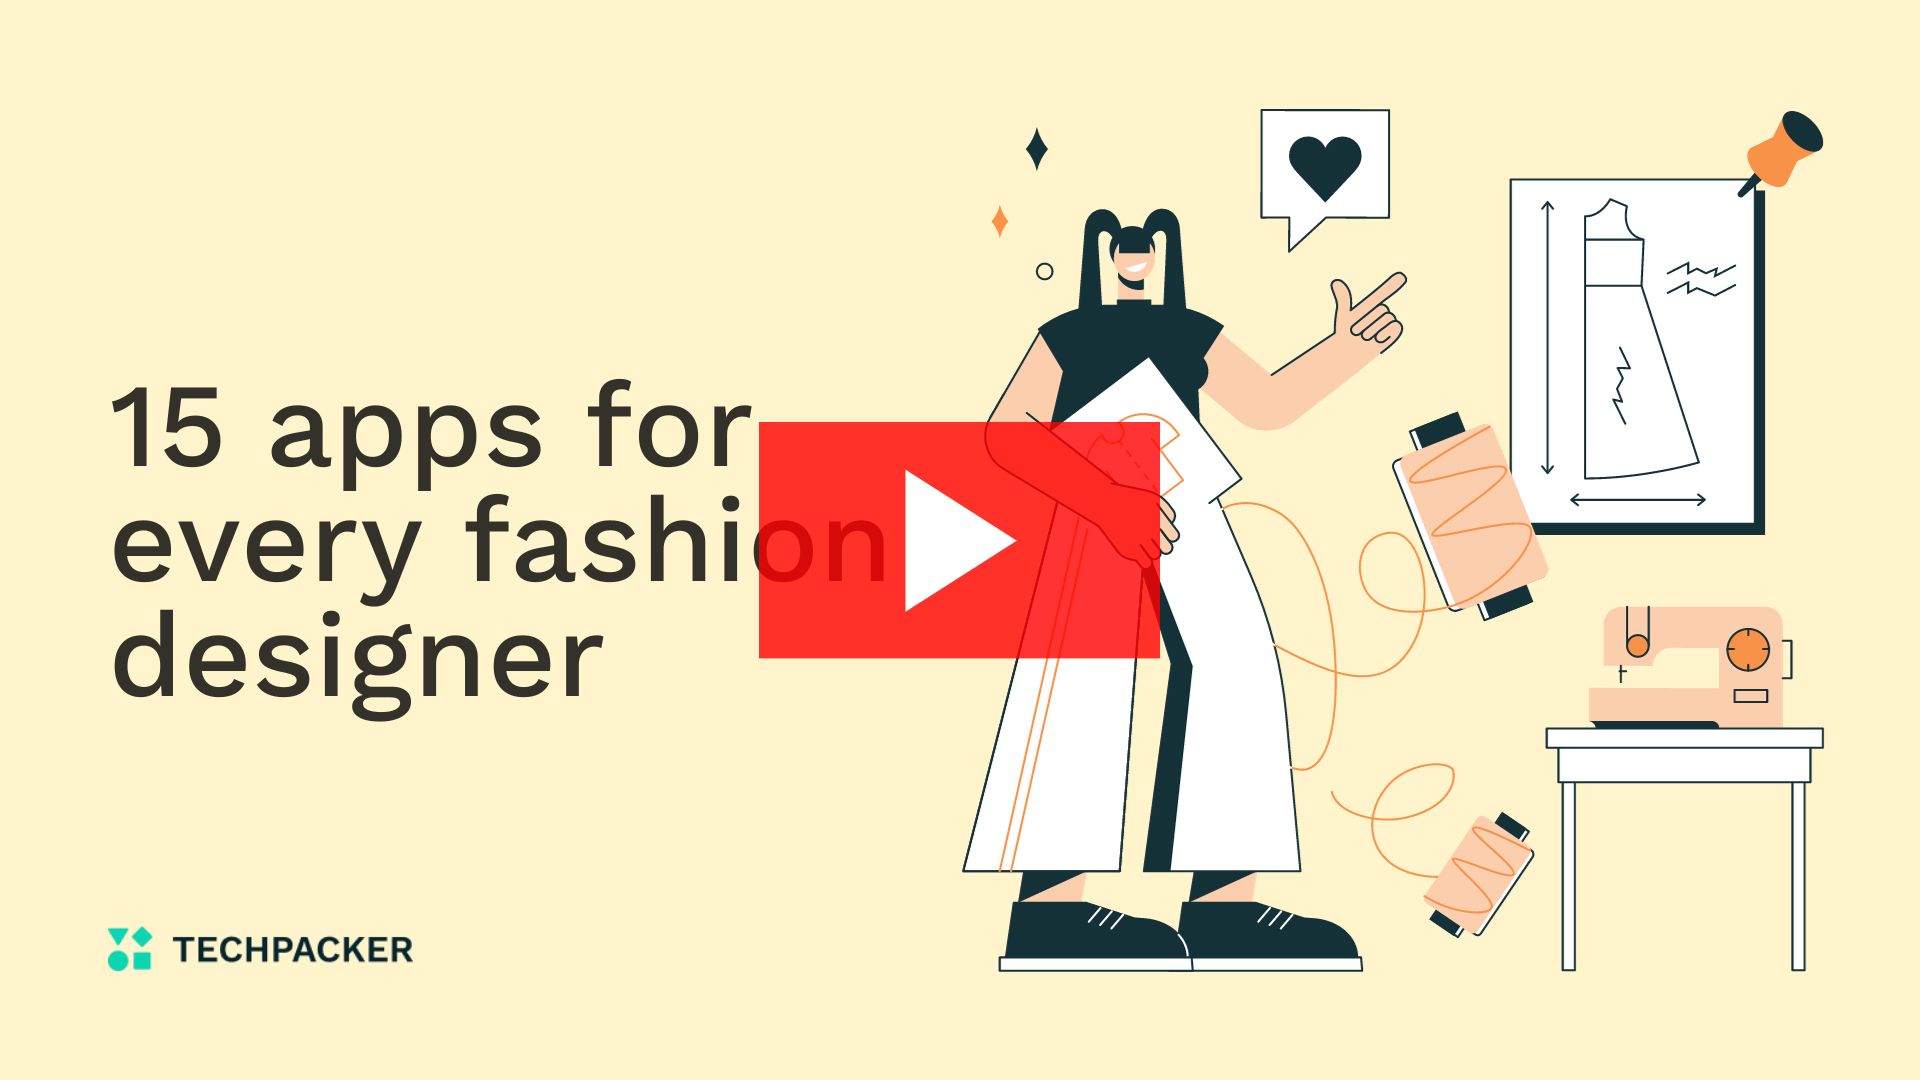 Video on 15 apps for fashion designers